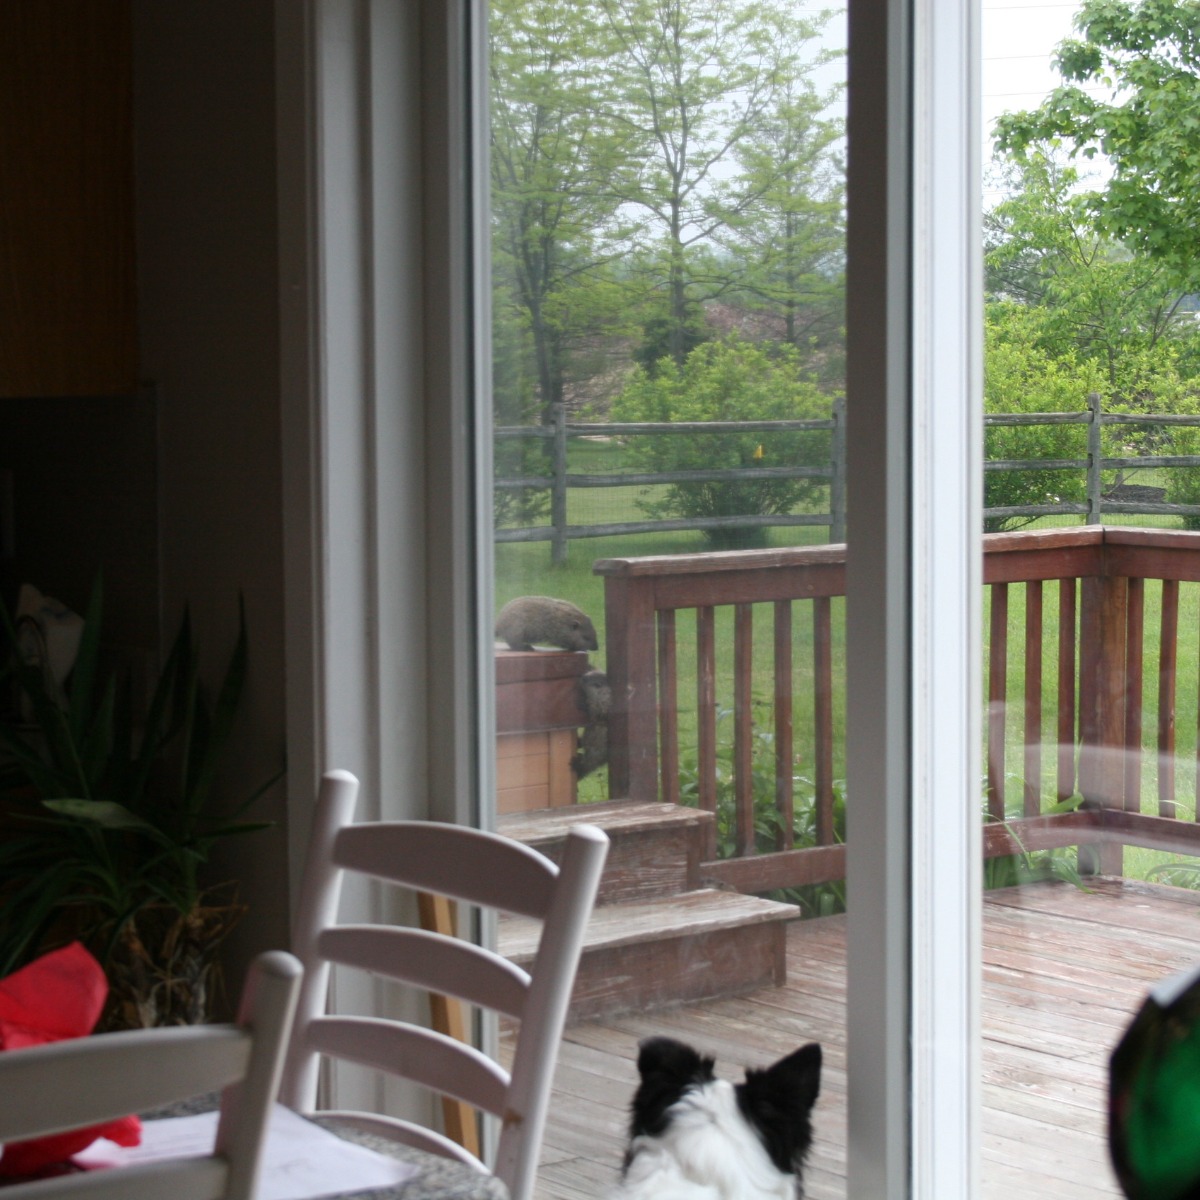 Border Collie watching groundhogs from inside the house in 2013